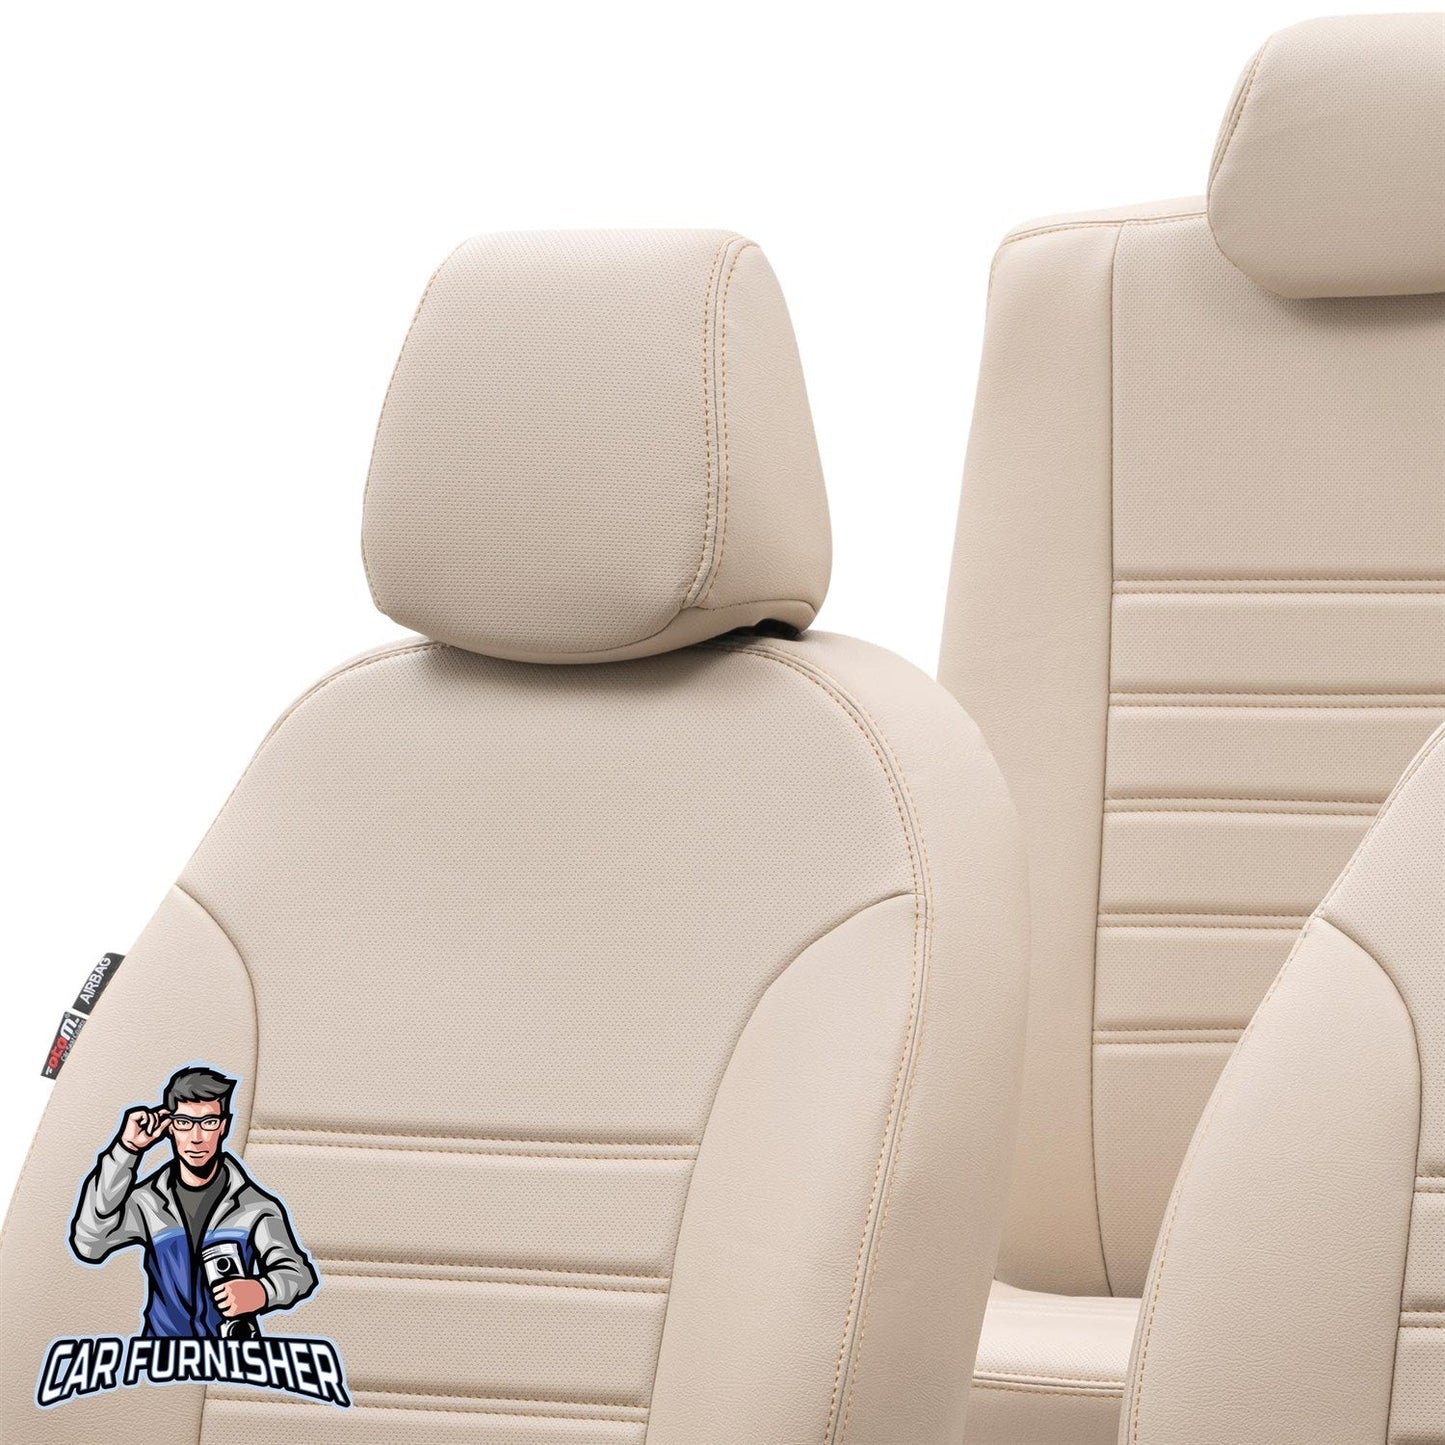 Chevrolet Aveo Seat Cover Istanbul Leather Design Beige Leather